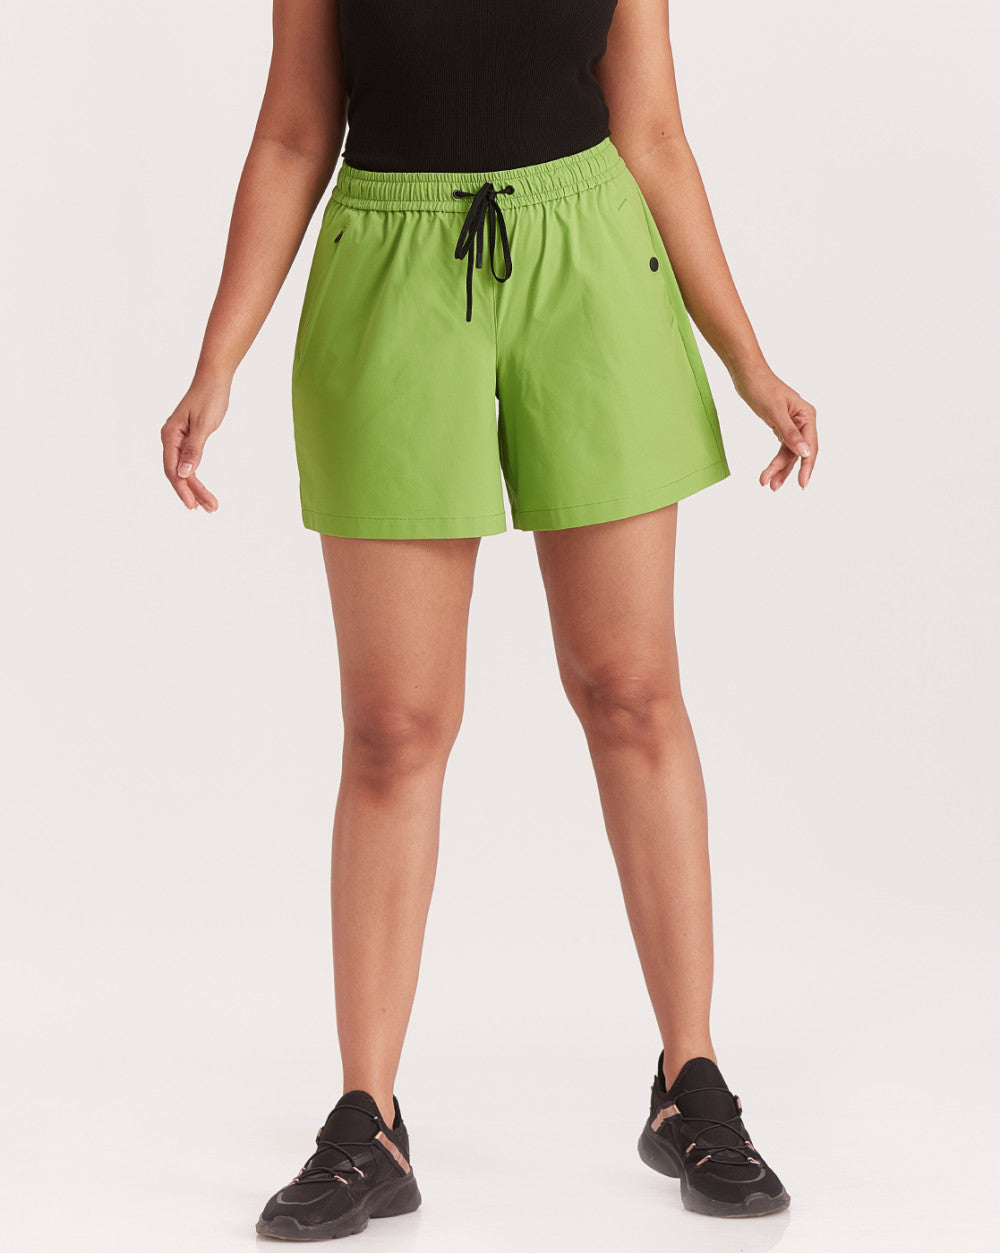 Mid Rise Running Shorts - Cyber Green